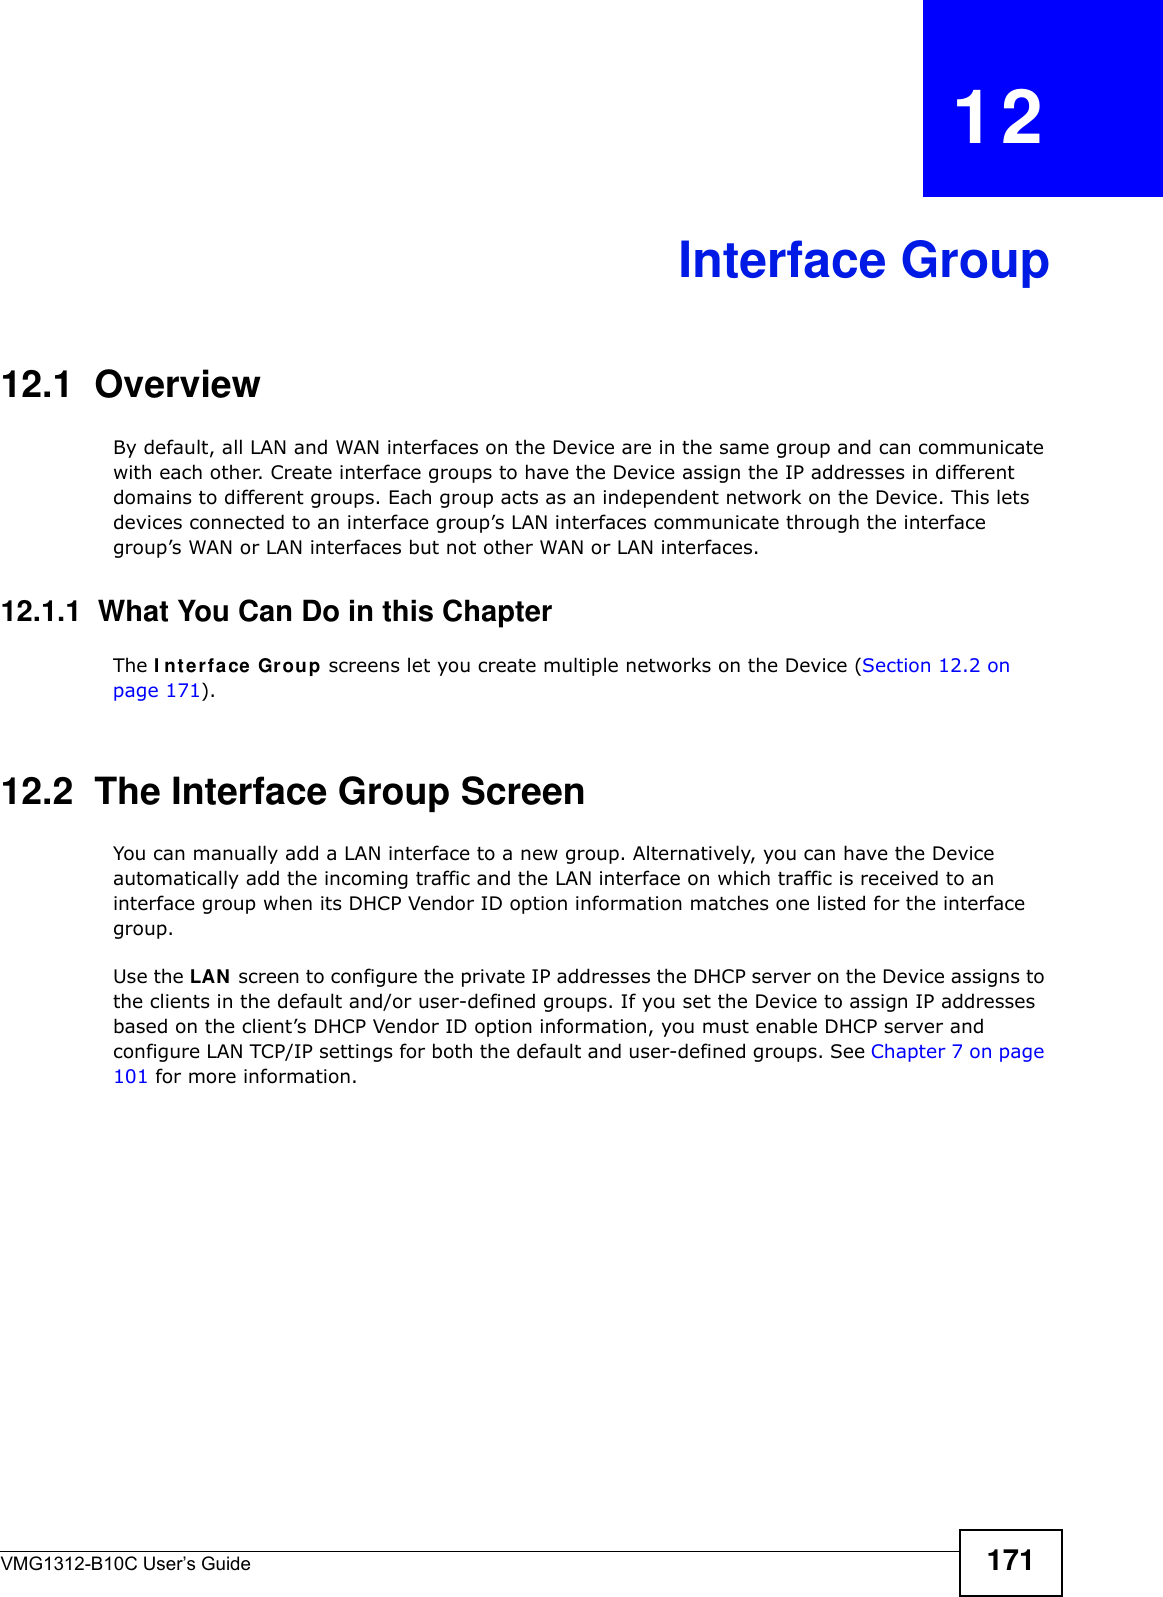 VMG1312-B10C User’s Guide 171CHAPTER   12Interface Group12.1  OverviewBy default, all LAN and WAN interfaces on the Device are in the same group and can communicate with each other. Create interface groups to have the Device assign the IP addresses in different domains to different groups. Each group acts as an independent network on the Device. This lets devices connected to an interface group’s LAN interfaces communicate through the interface group’s WAN or LAN interfaces but not other WAN or LAN interfaces.12.1.1  What You Can Do in this ChapterThe I nt erface Gr ou p screens let you create multiple networks on the Device (Section 12.2 on page 171).12.2  The Interface Group ScreenYou can manually add a LAN interface to a new group. Alternatively, you can have the Device automatically add the incoming traffic and the LAN interface on which traffic is received to an interface group when its DHCP Vendor ID option information matches one listed for the interface group. Use the LAN  screen to configure the private IP addresses the DHCP server on the Device assigns to the clients in the default and/or user-defined groups. If you set the Device to assign IP addresses based on the client’s DHCP Vendor ID option information, you must enable DHCP server and configure LAN TCP/IP settings for both the default and user-defined groups. See Chapter 7 on page 101 for more information.